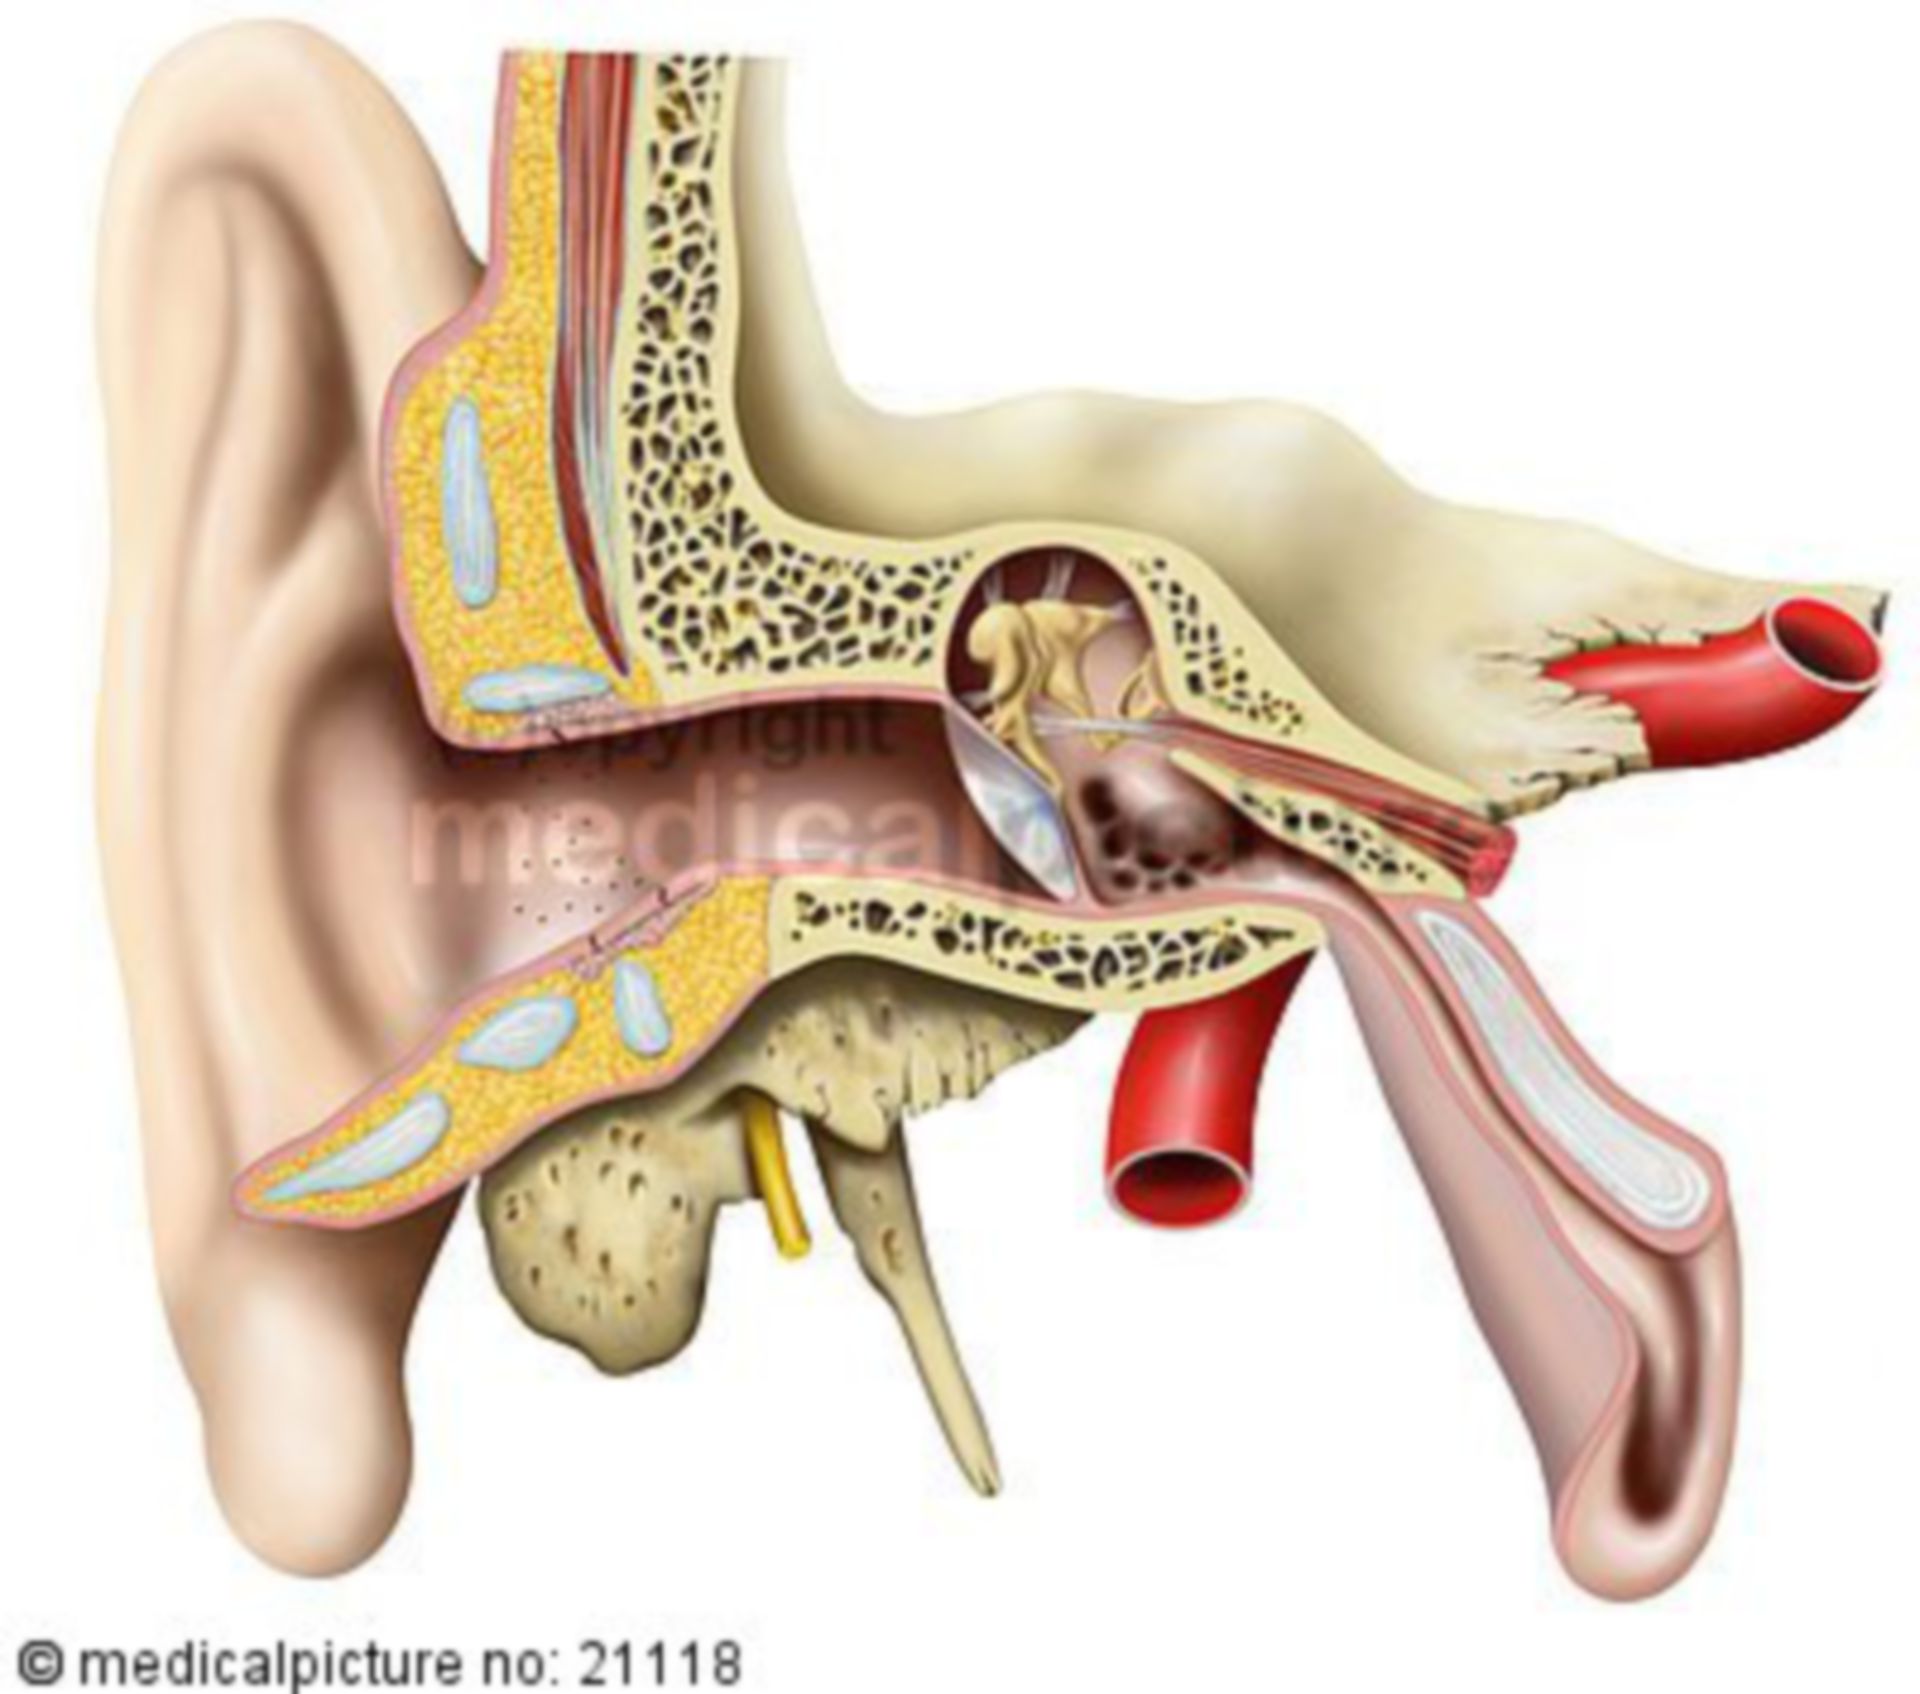 Outer and Middle Ear